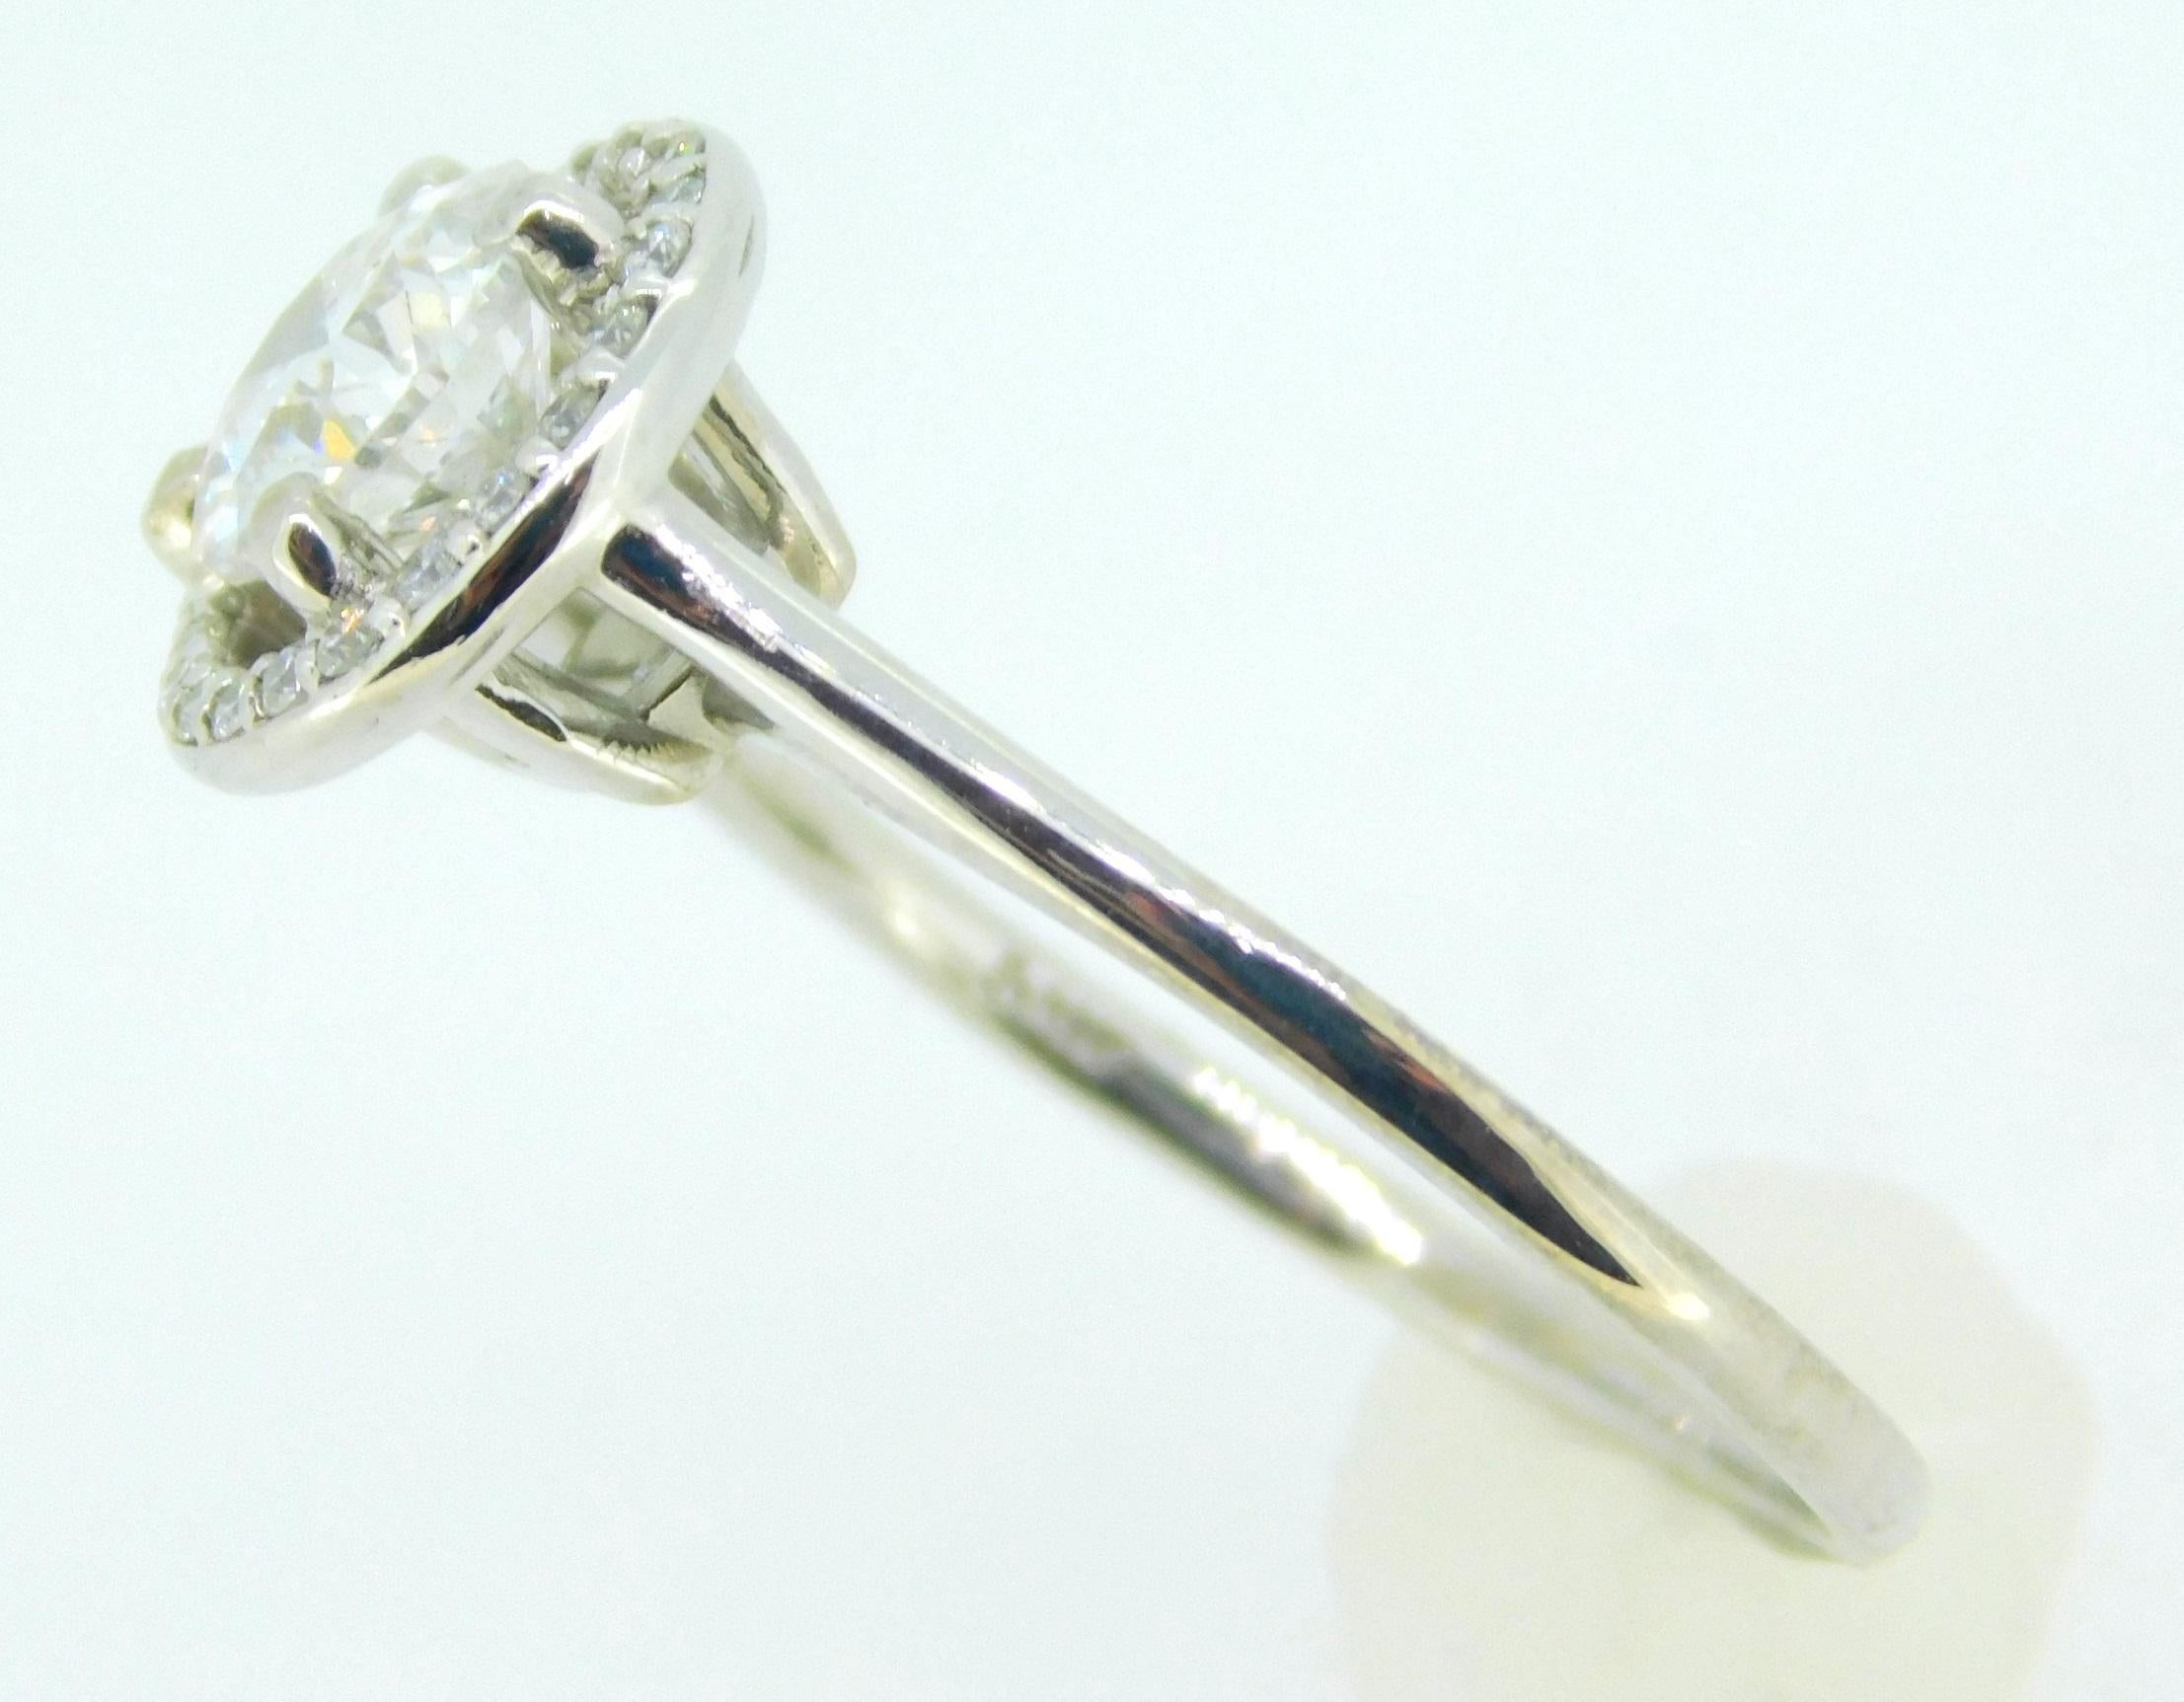 14k Gold .85ct Genuine Natural Diamond Ring with Diamond Halo (#J4123)

14k white gold ring featuring stunning round diamonds. The center diamond weighs .85 cts and measures approximately 6.0mm. There is a halo of small round diamonds with total